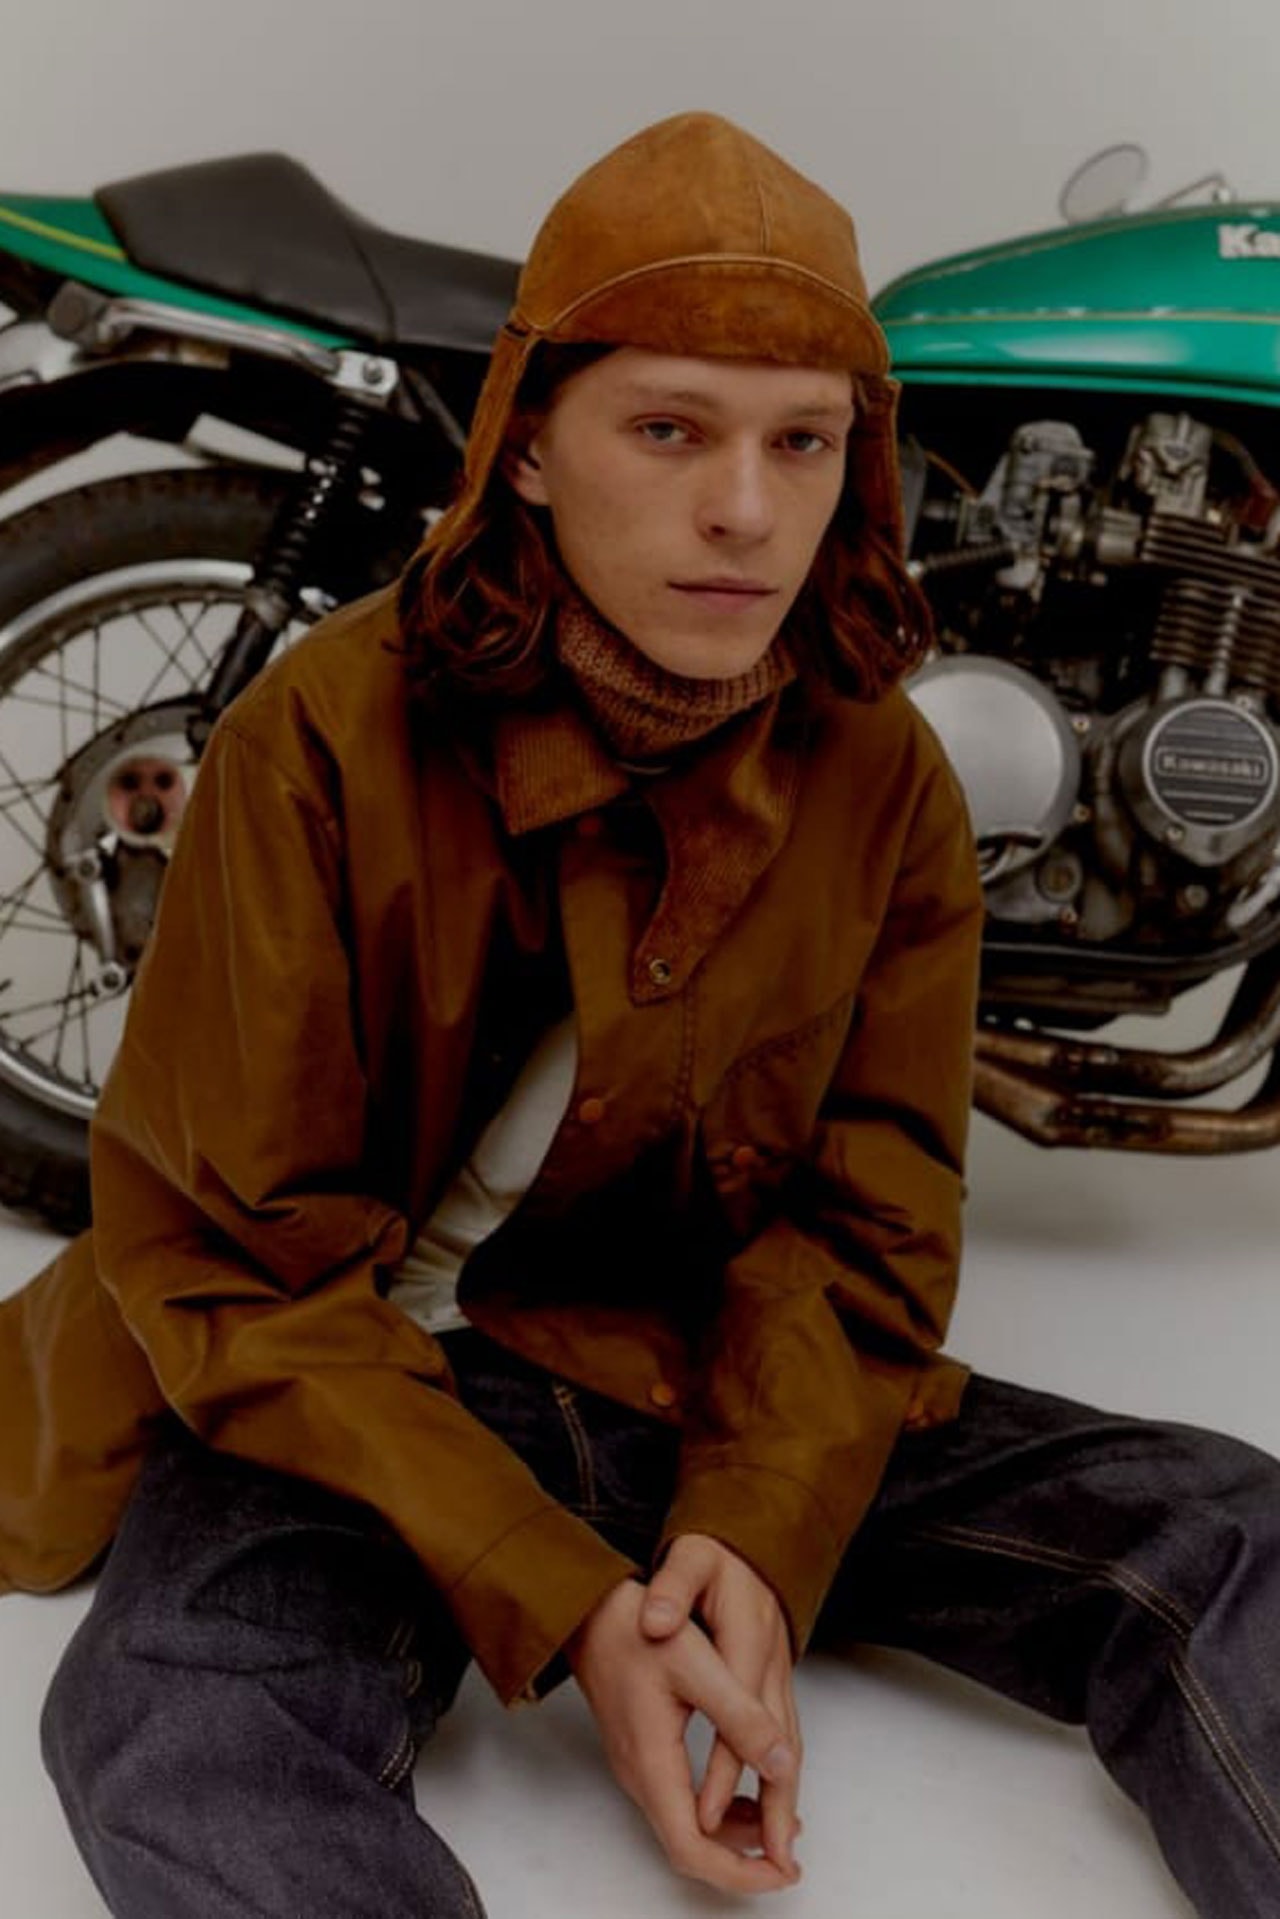 Barbour YMC Fall Winter 2022 Workwear Military Garments Fashion Hypebeast Collaboration UK Fashion Style Britain Contemporary